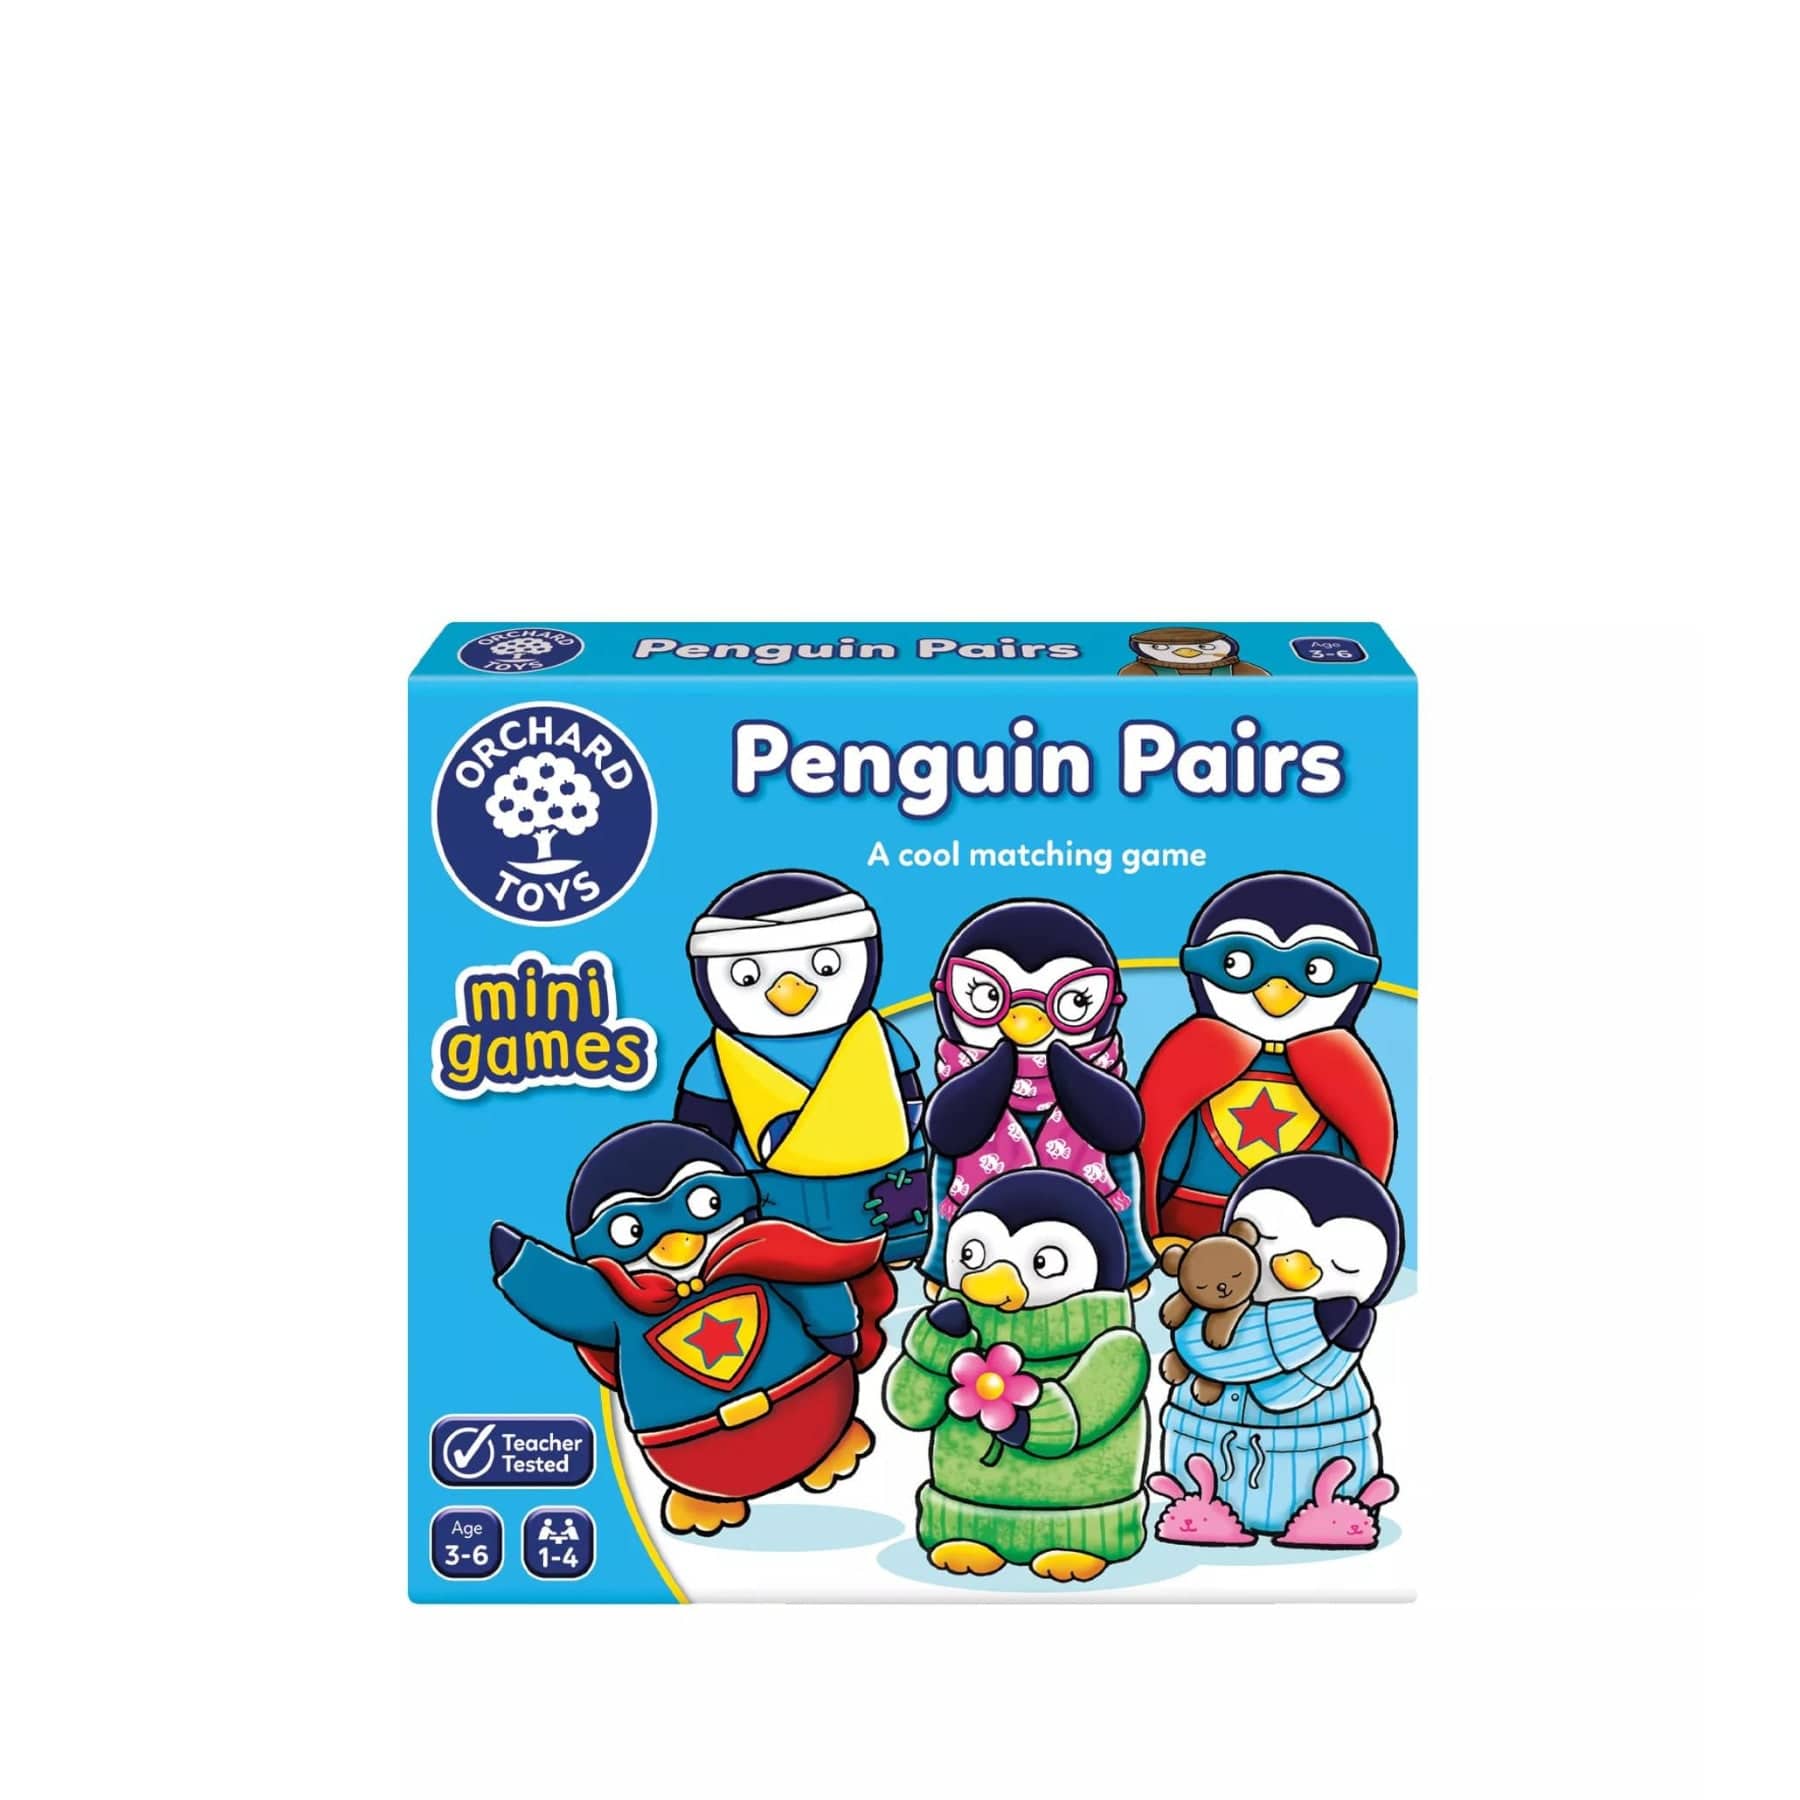 Alt text: "Orchard Toys Penguin Pairs mini game box featuring colorful cartoon penguins in various costumes, a memory matching game for ages 3-6, labeled as teacher tested."